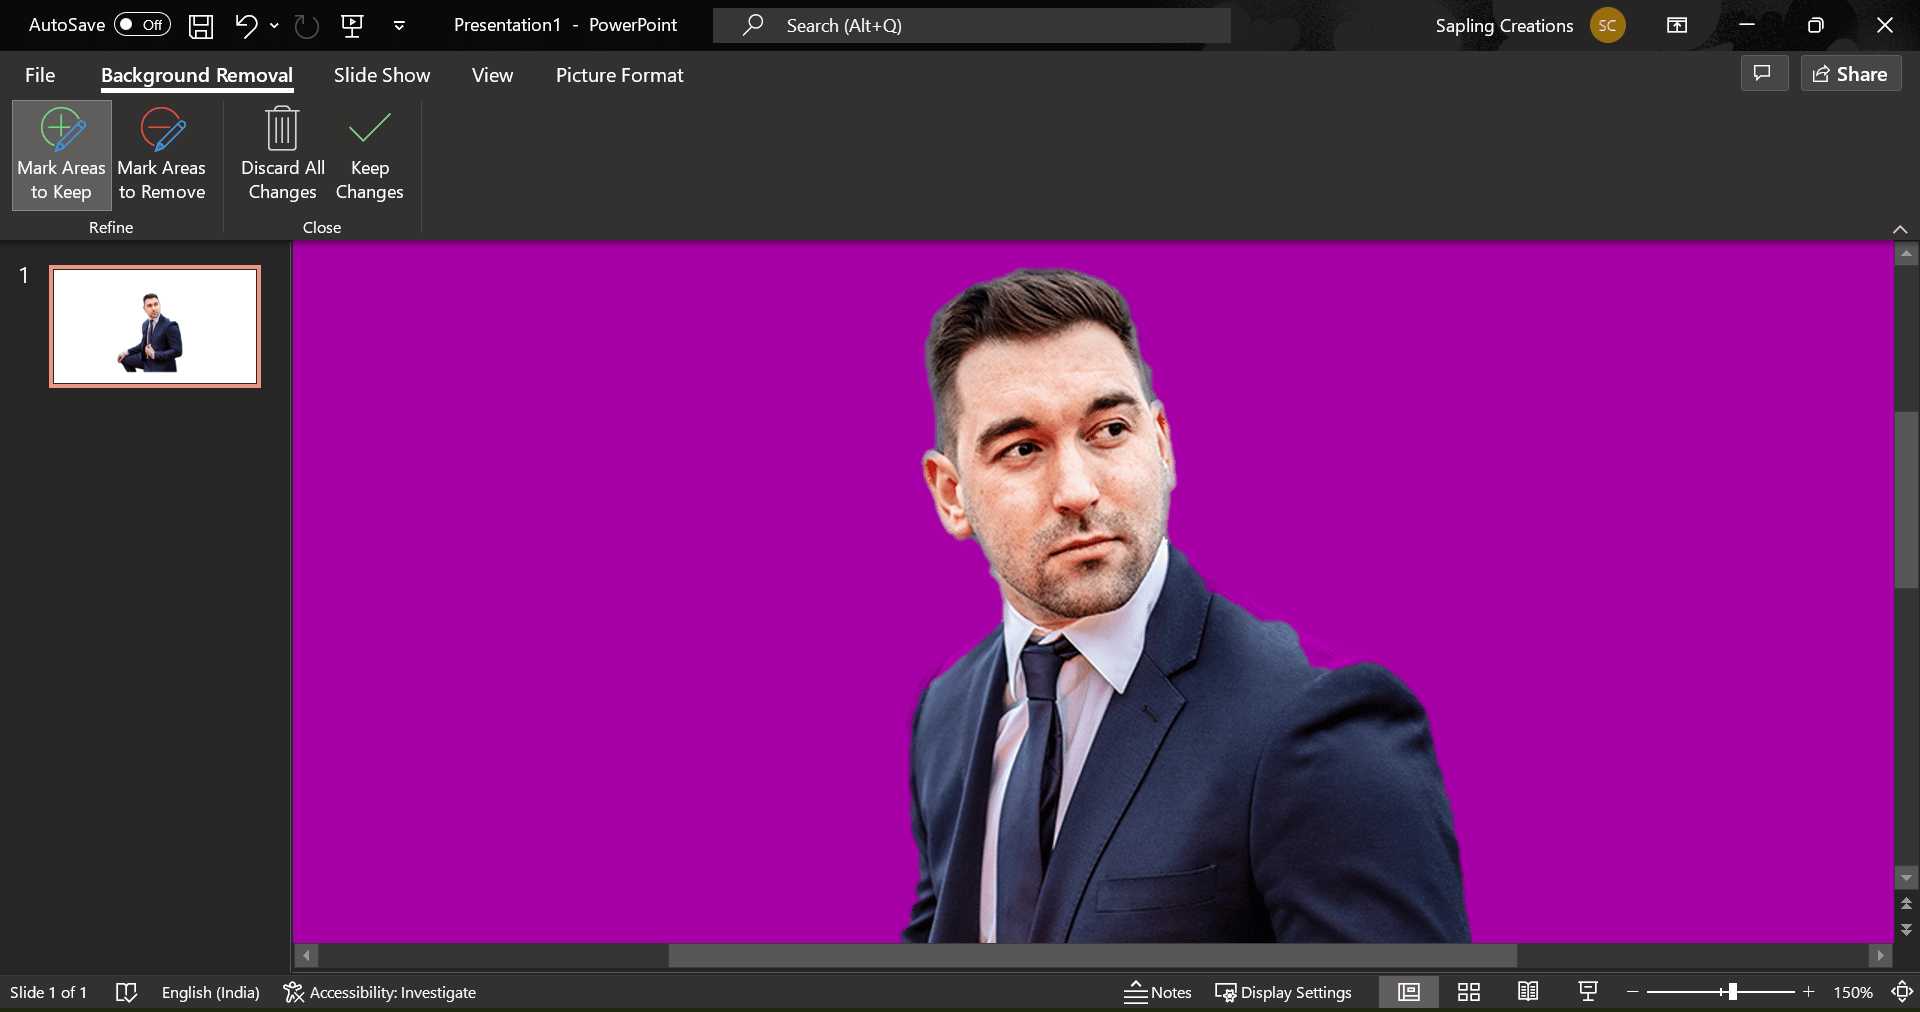 How to remove background from picture in PowerPoint